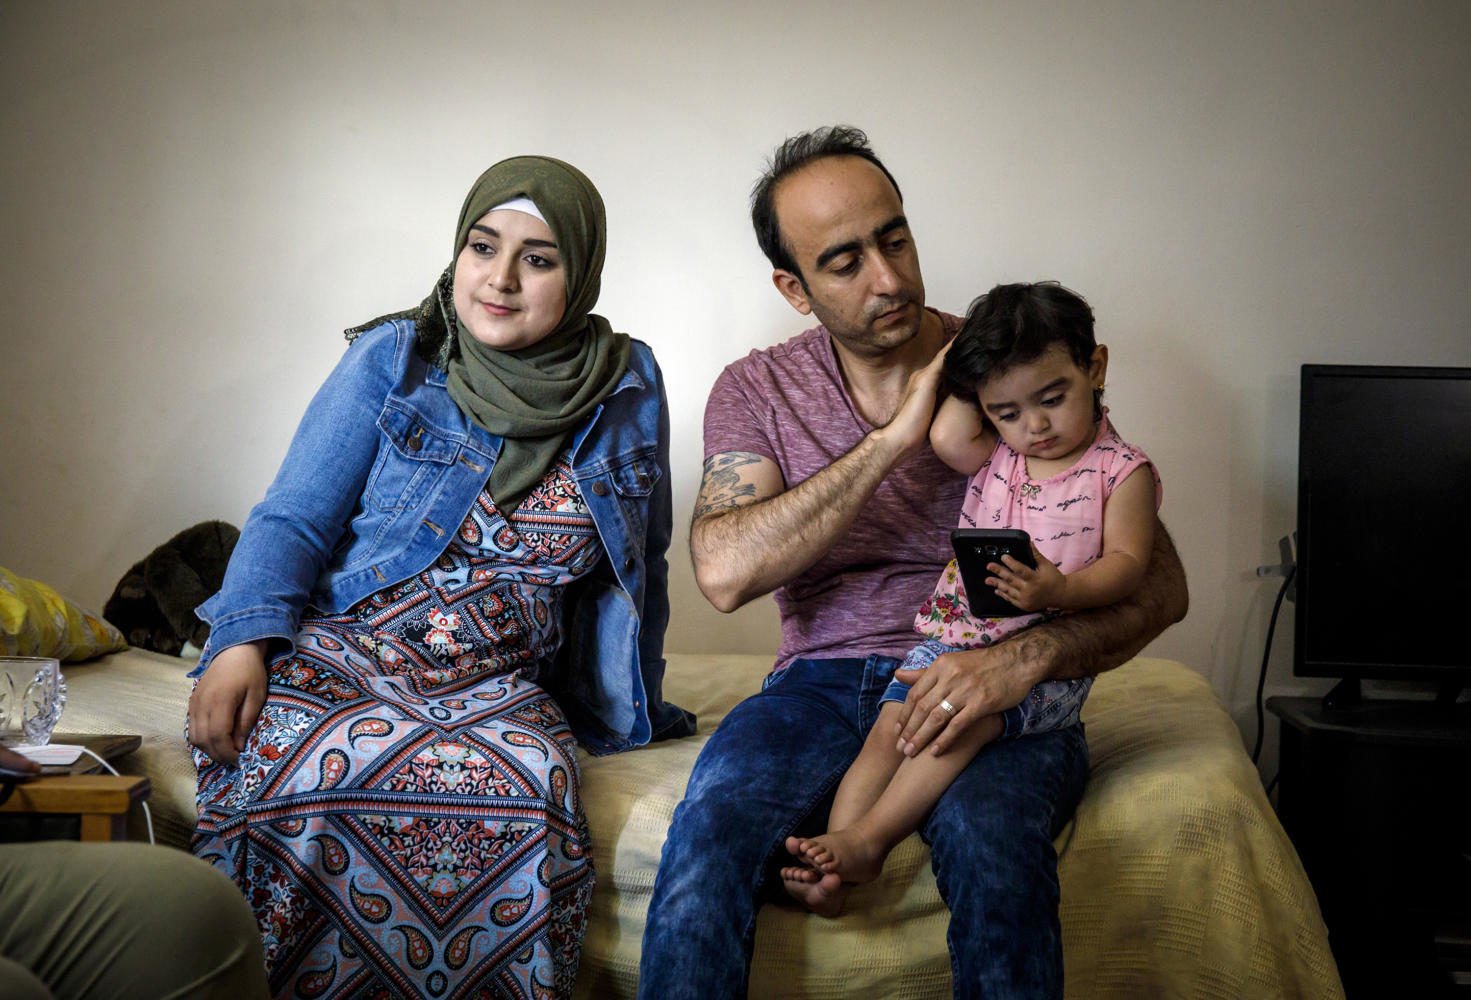 Baraa, Abdulmajeed and Sham Haj Khalaf sit in the living room of their Skokie, Ill. home on July 23, 2017. The family emigrated as refugees from Syria. (Brian Cassella/Chicago Tribune/TNS)